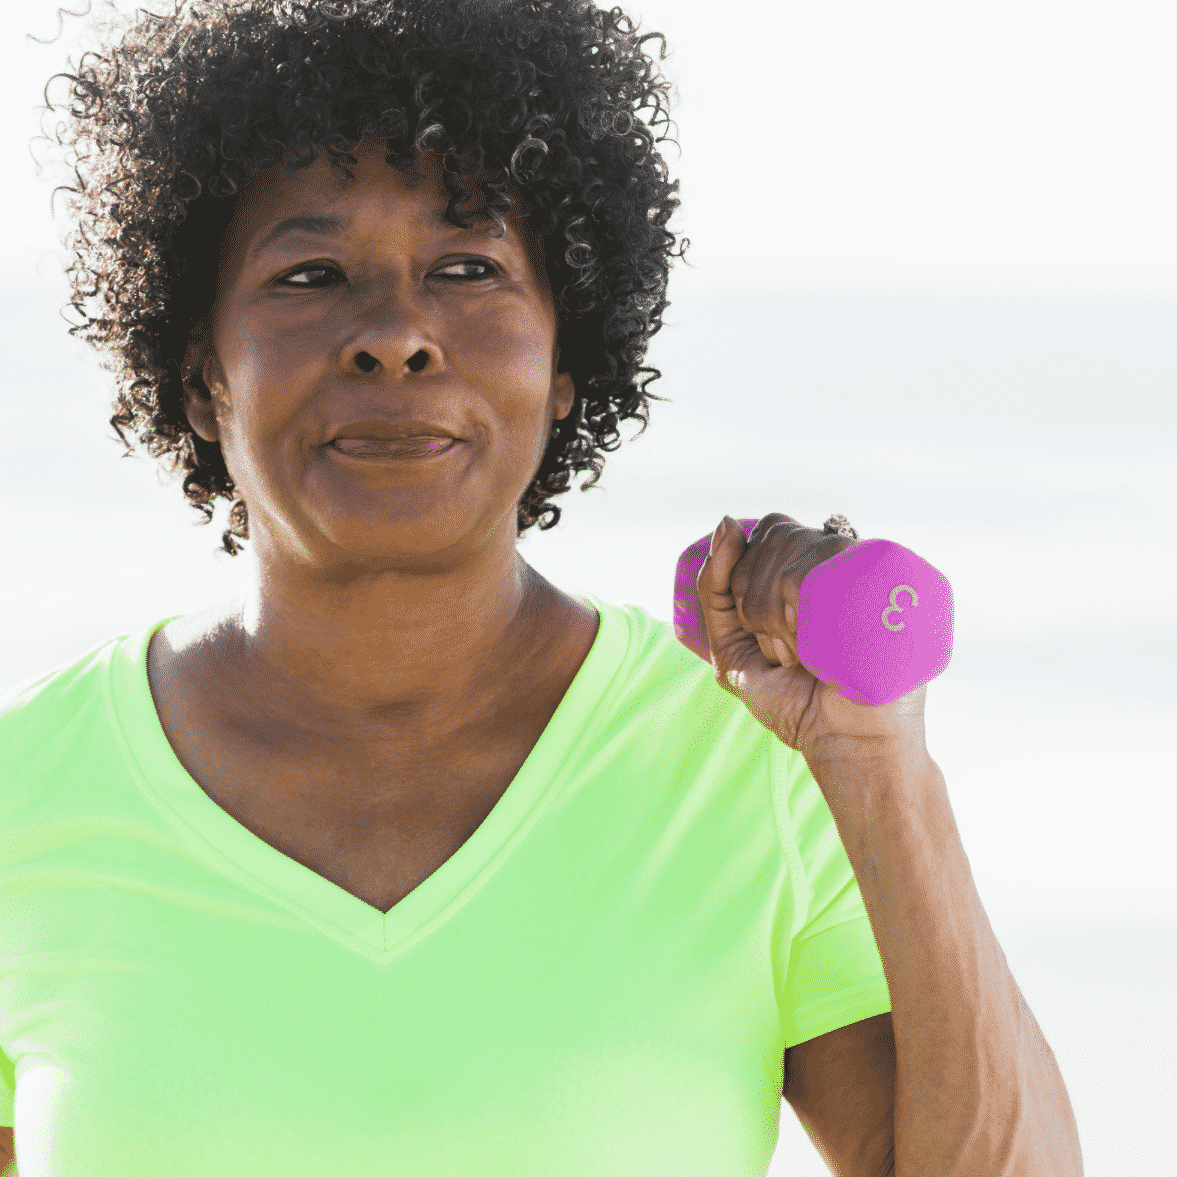 The Best Home Workout Equipment for Older Adults